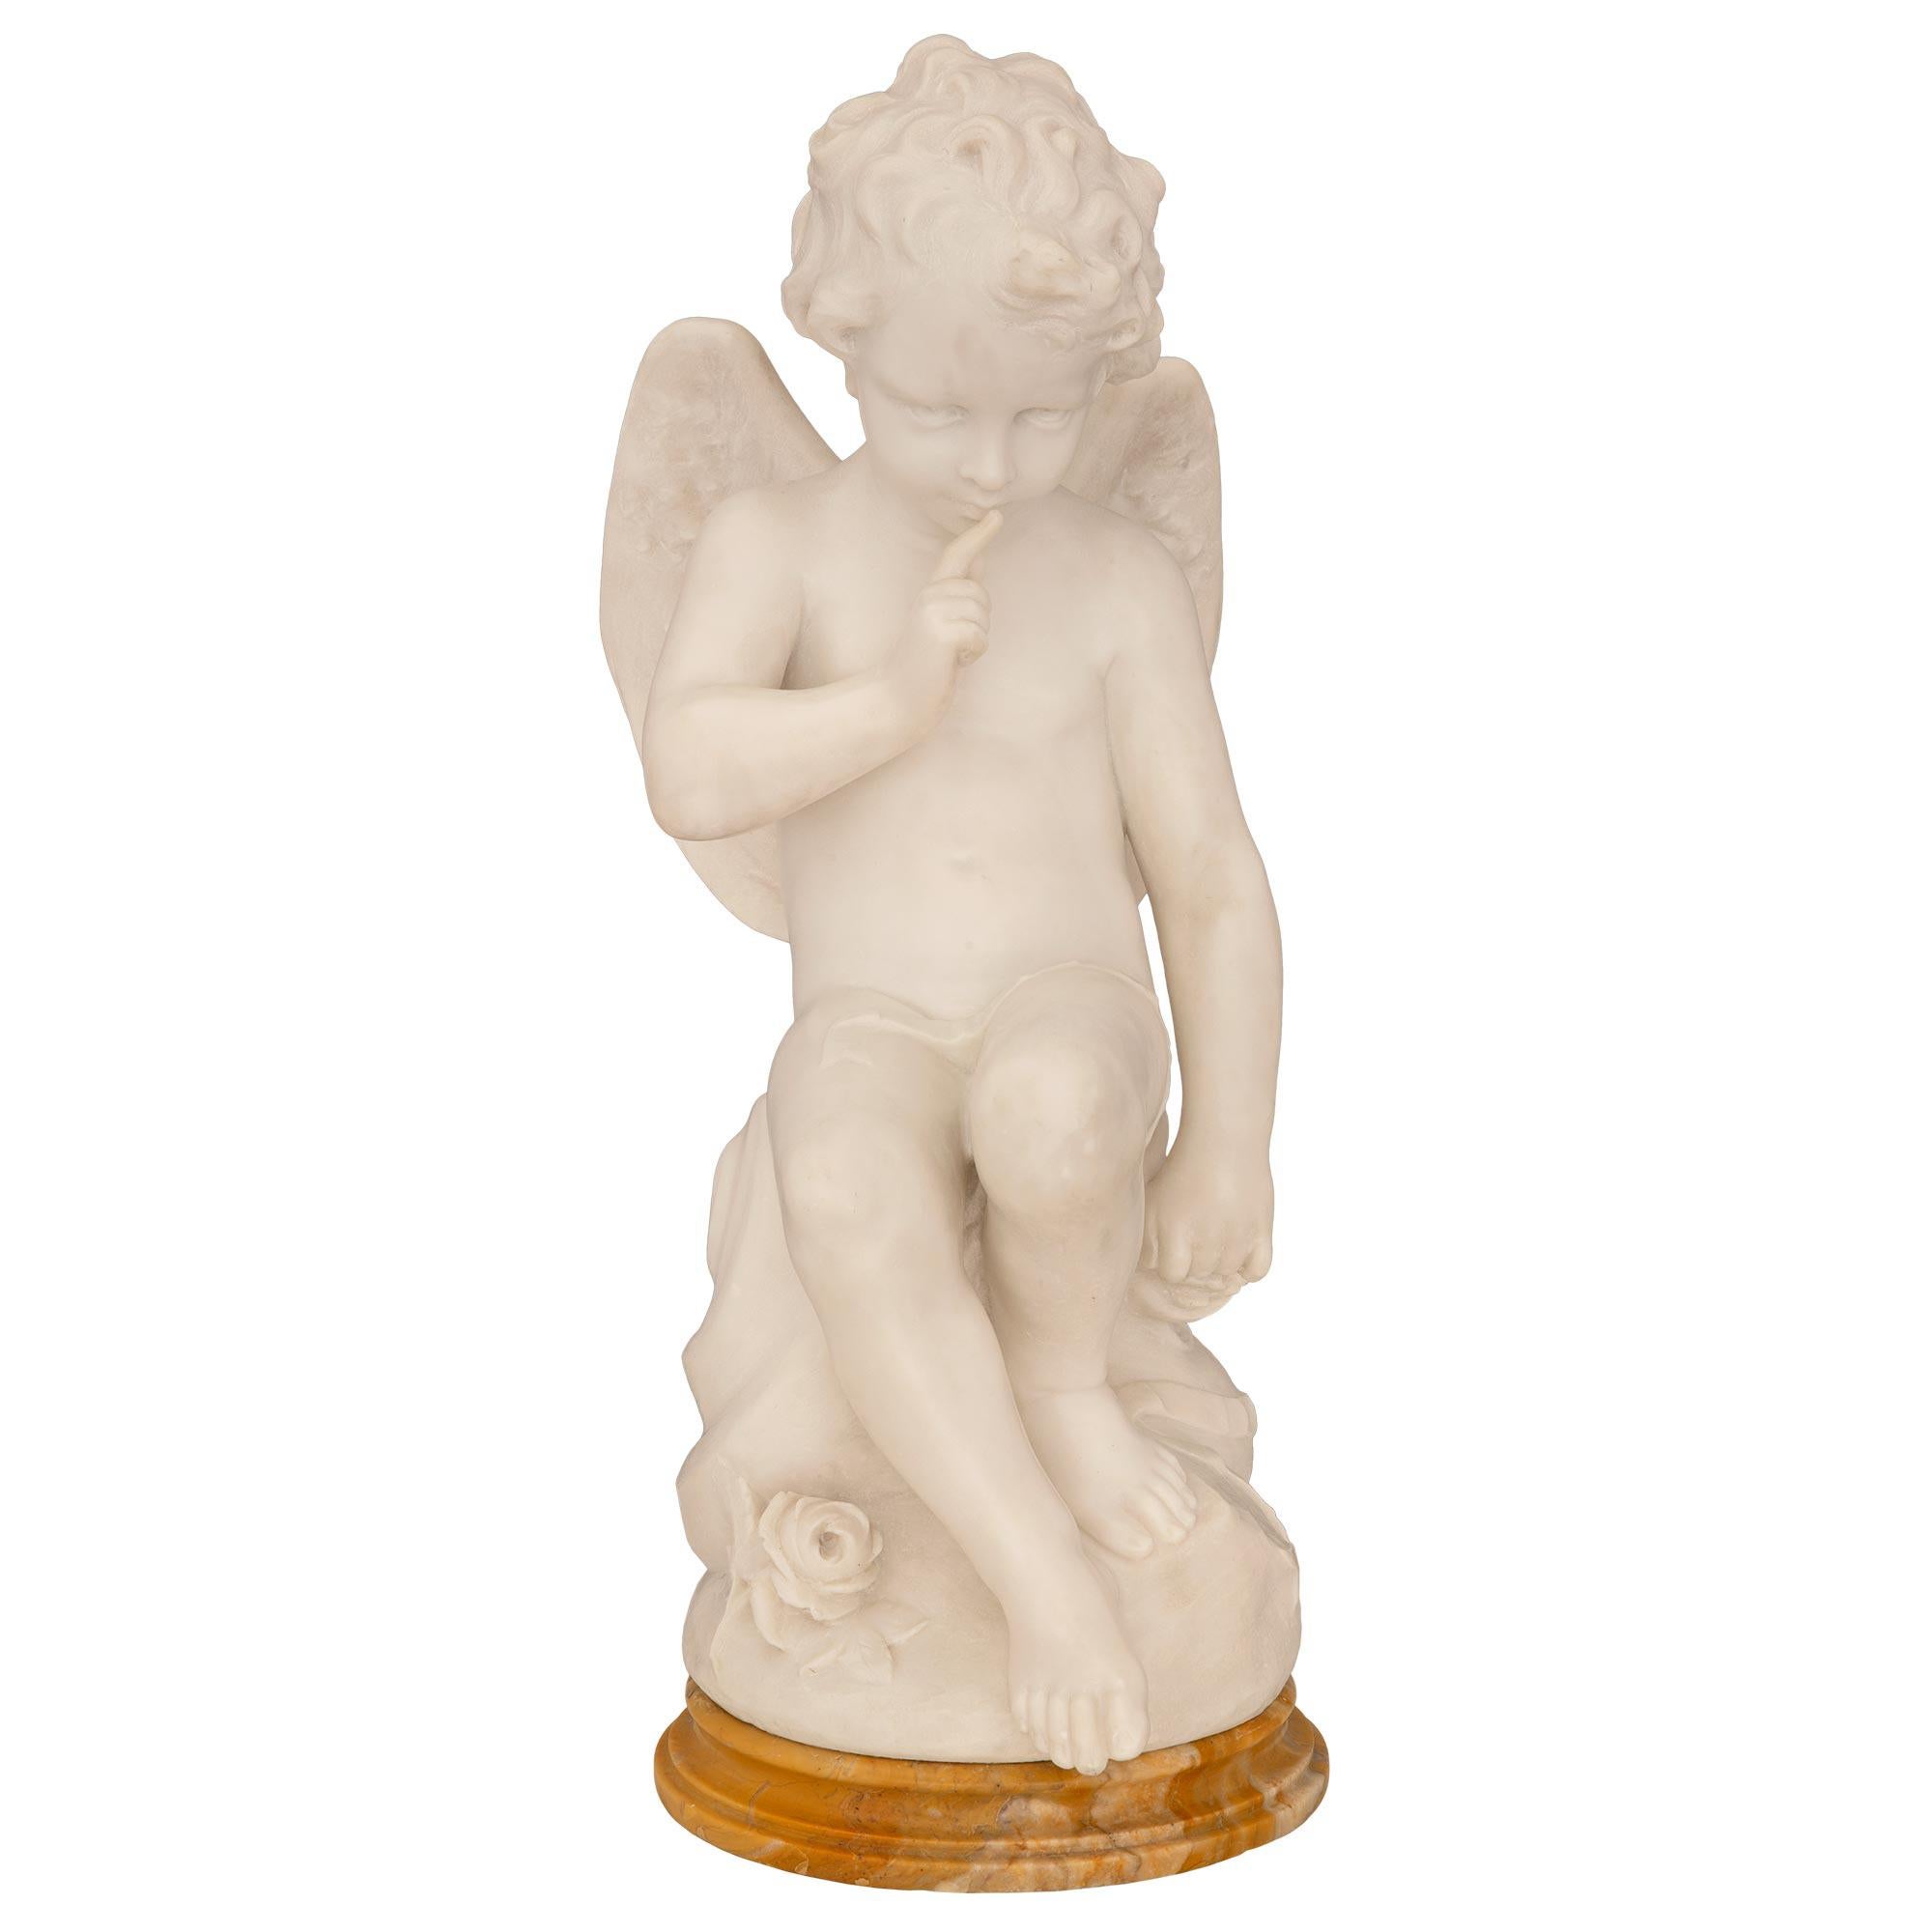 A beautiful and very high quality Italian late 19th century Trets and white Carrara marble statue by Pasquale Rizzoli. The statue, in the manner of Etienne Maurice Falconet (1716-1791), is raised by a most decorative circular Trets marble base with